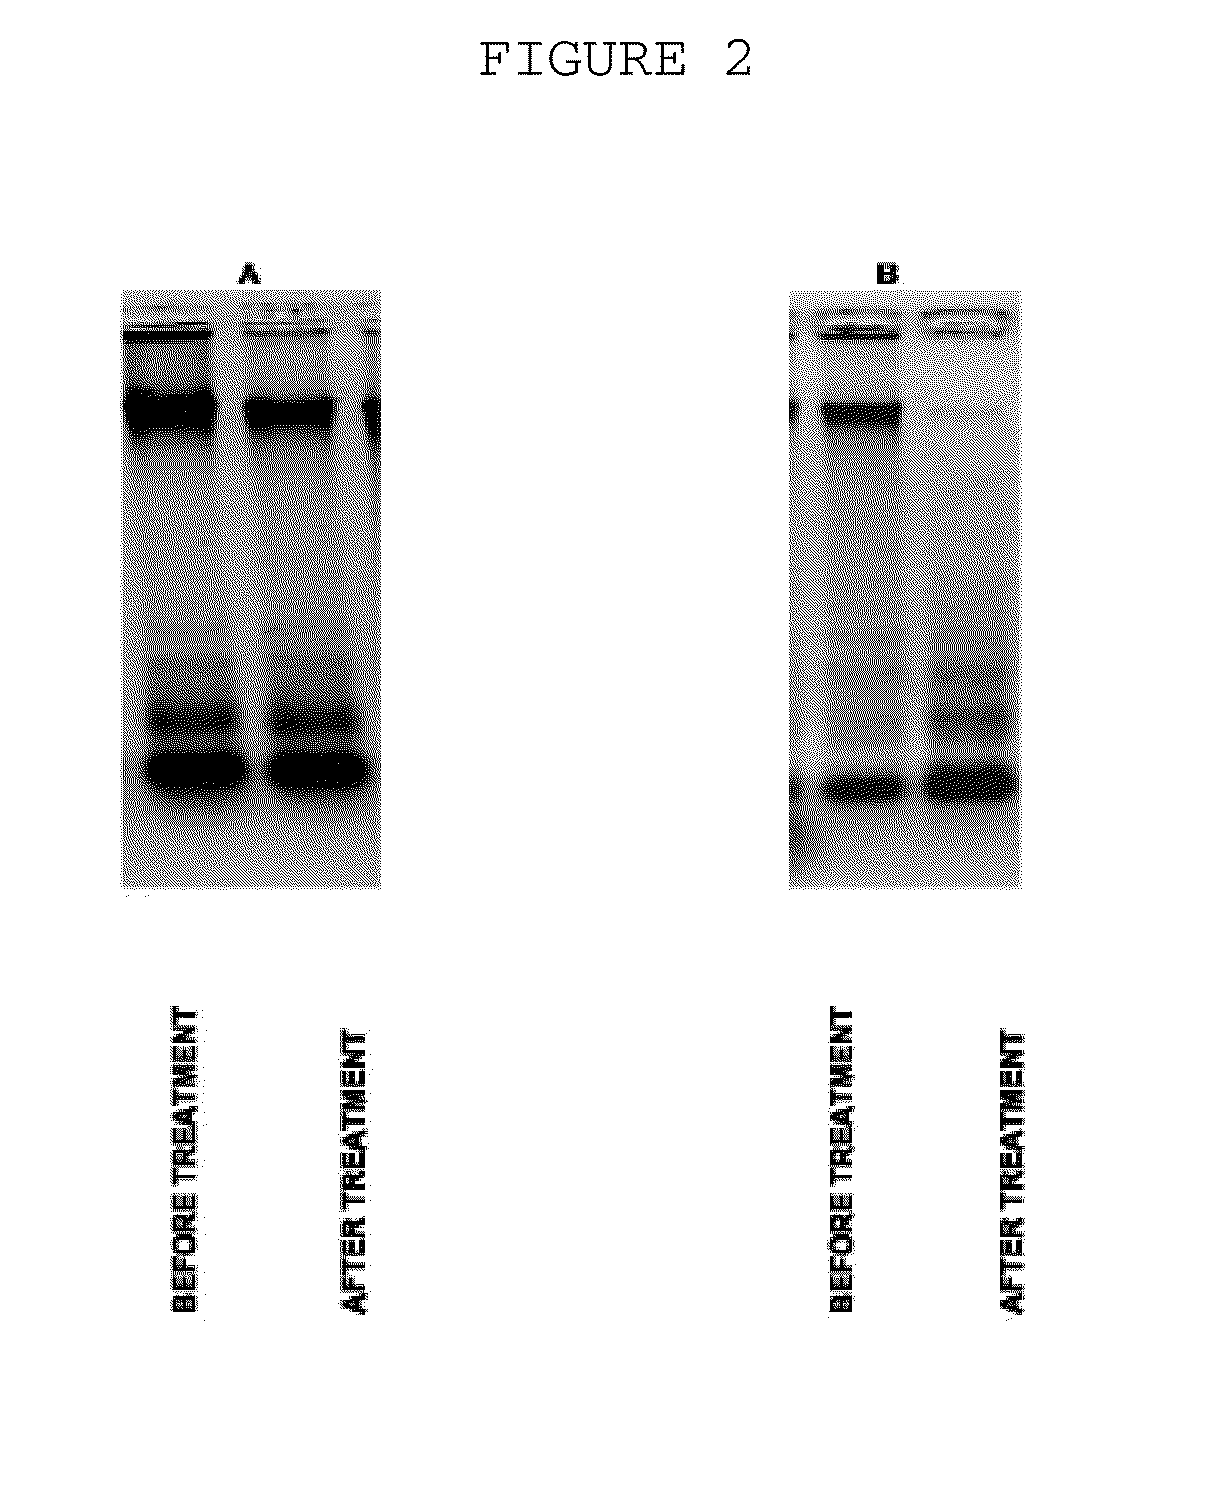 Method for Treating Systemic Bacterial, Fungal and Protozoan Infection